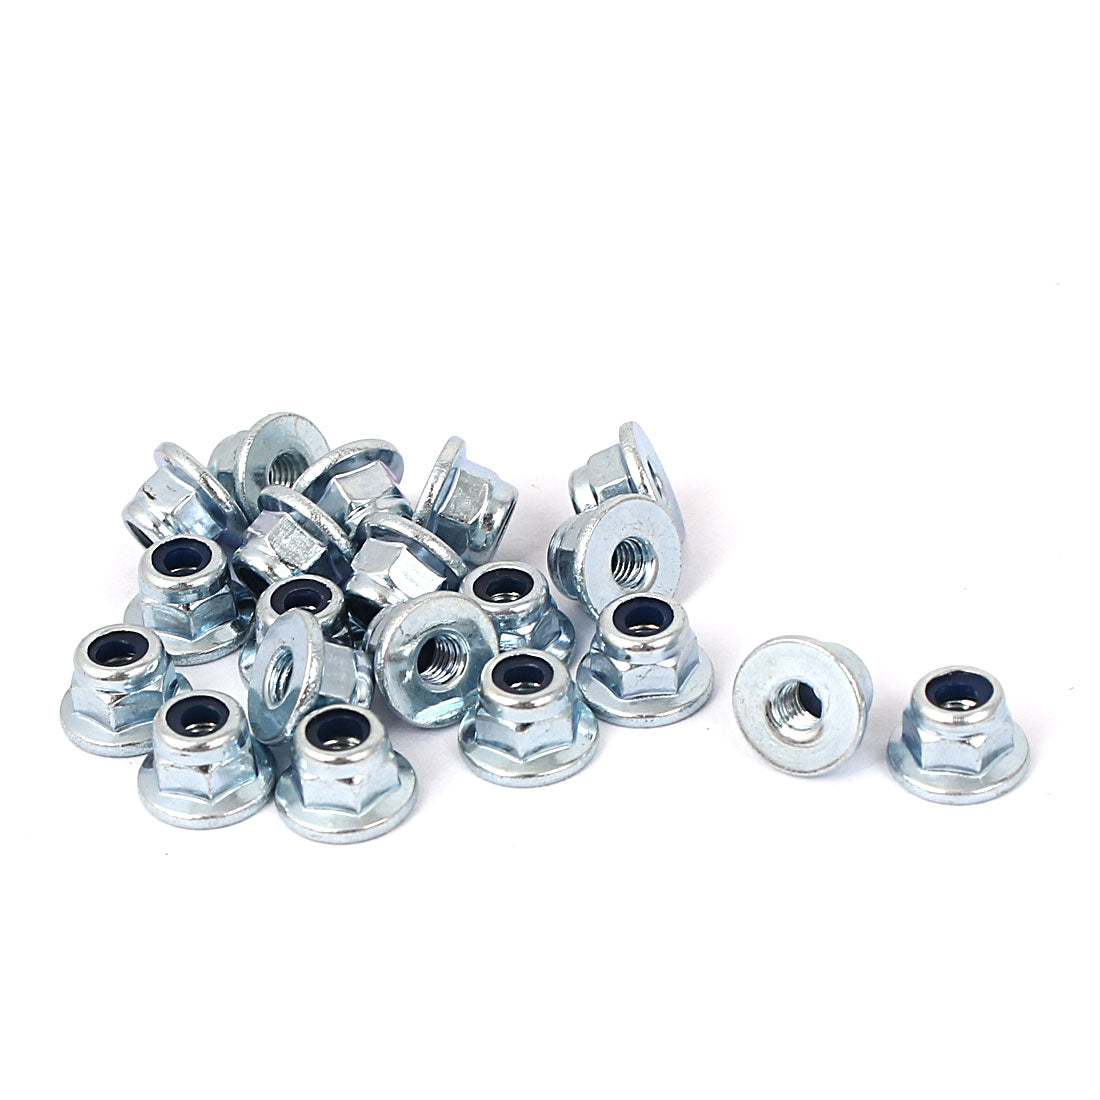 uxcell Uxcell M3 Metric Carbon Steel Hex Flange  Lock Nut 20pcs